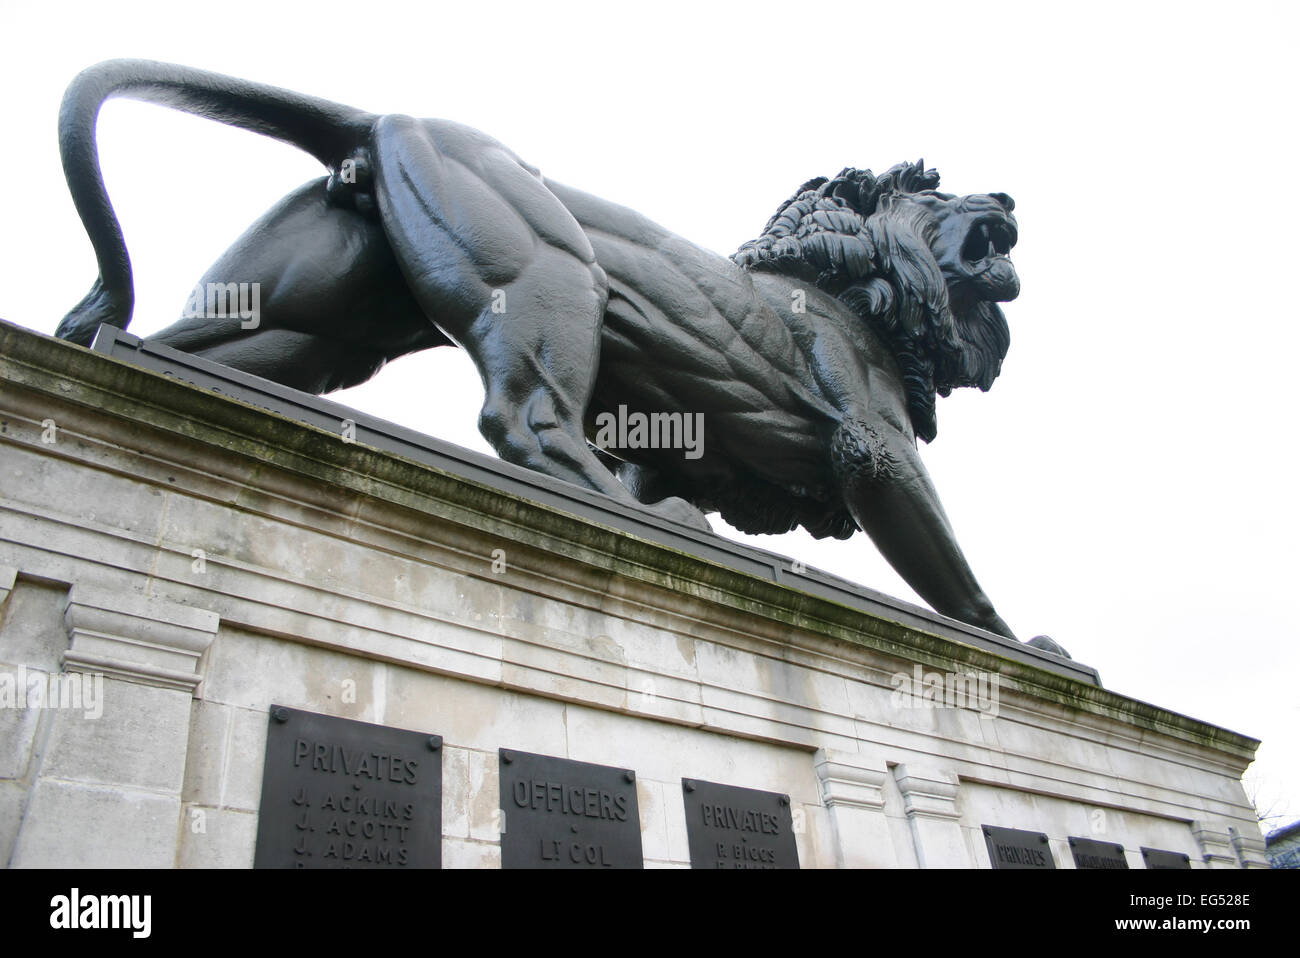 The Maiwand Lion memorial to the First World War in the Forbury Gardens, Reading, England. Stock Photo